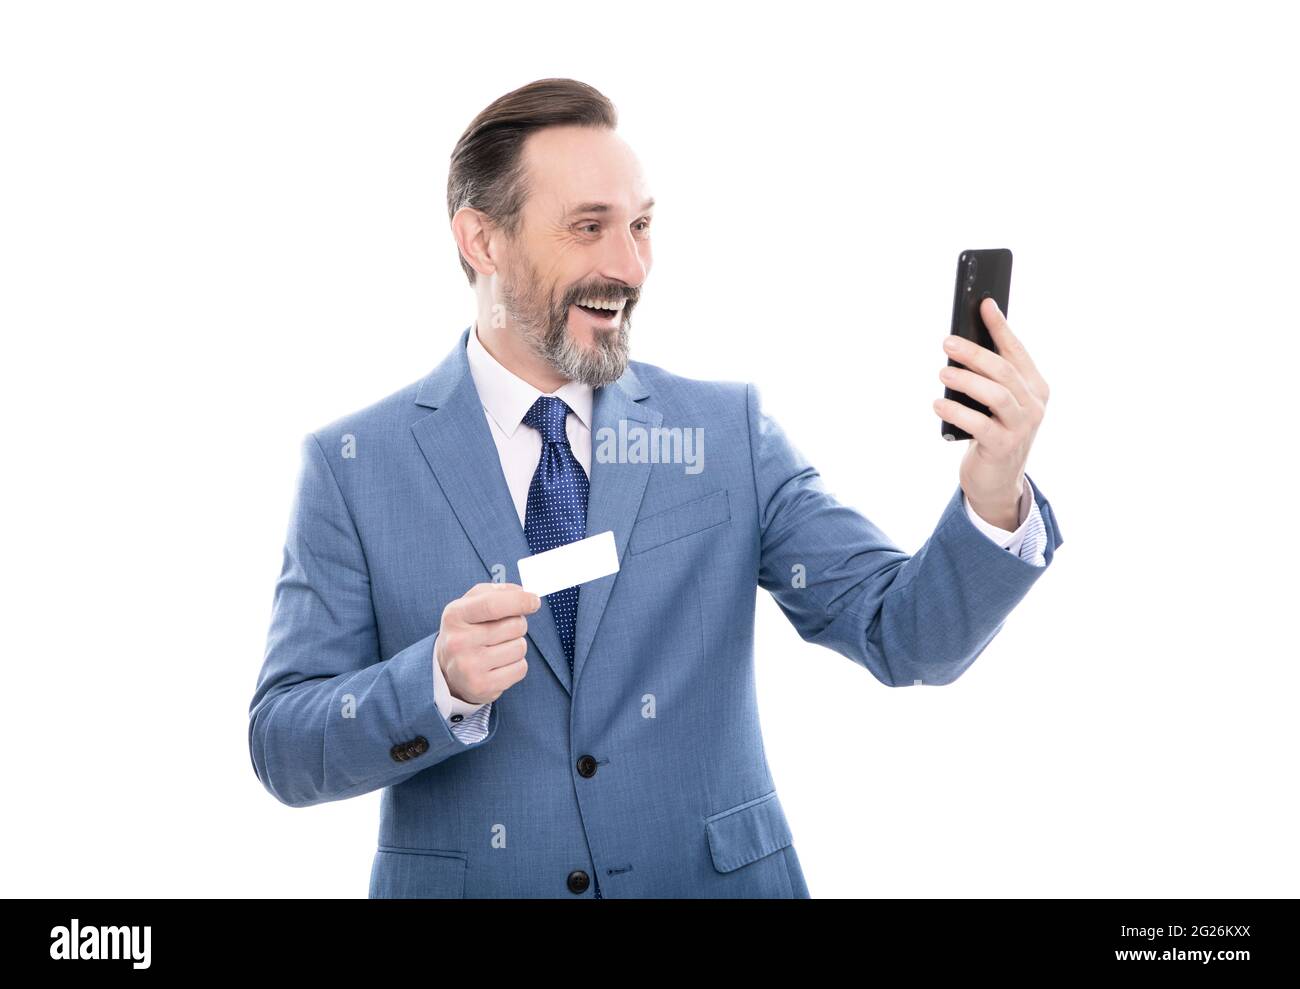 fast payment. making selfie. customer use online money on mobile phone. Stock Photo